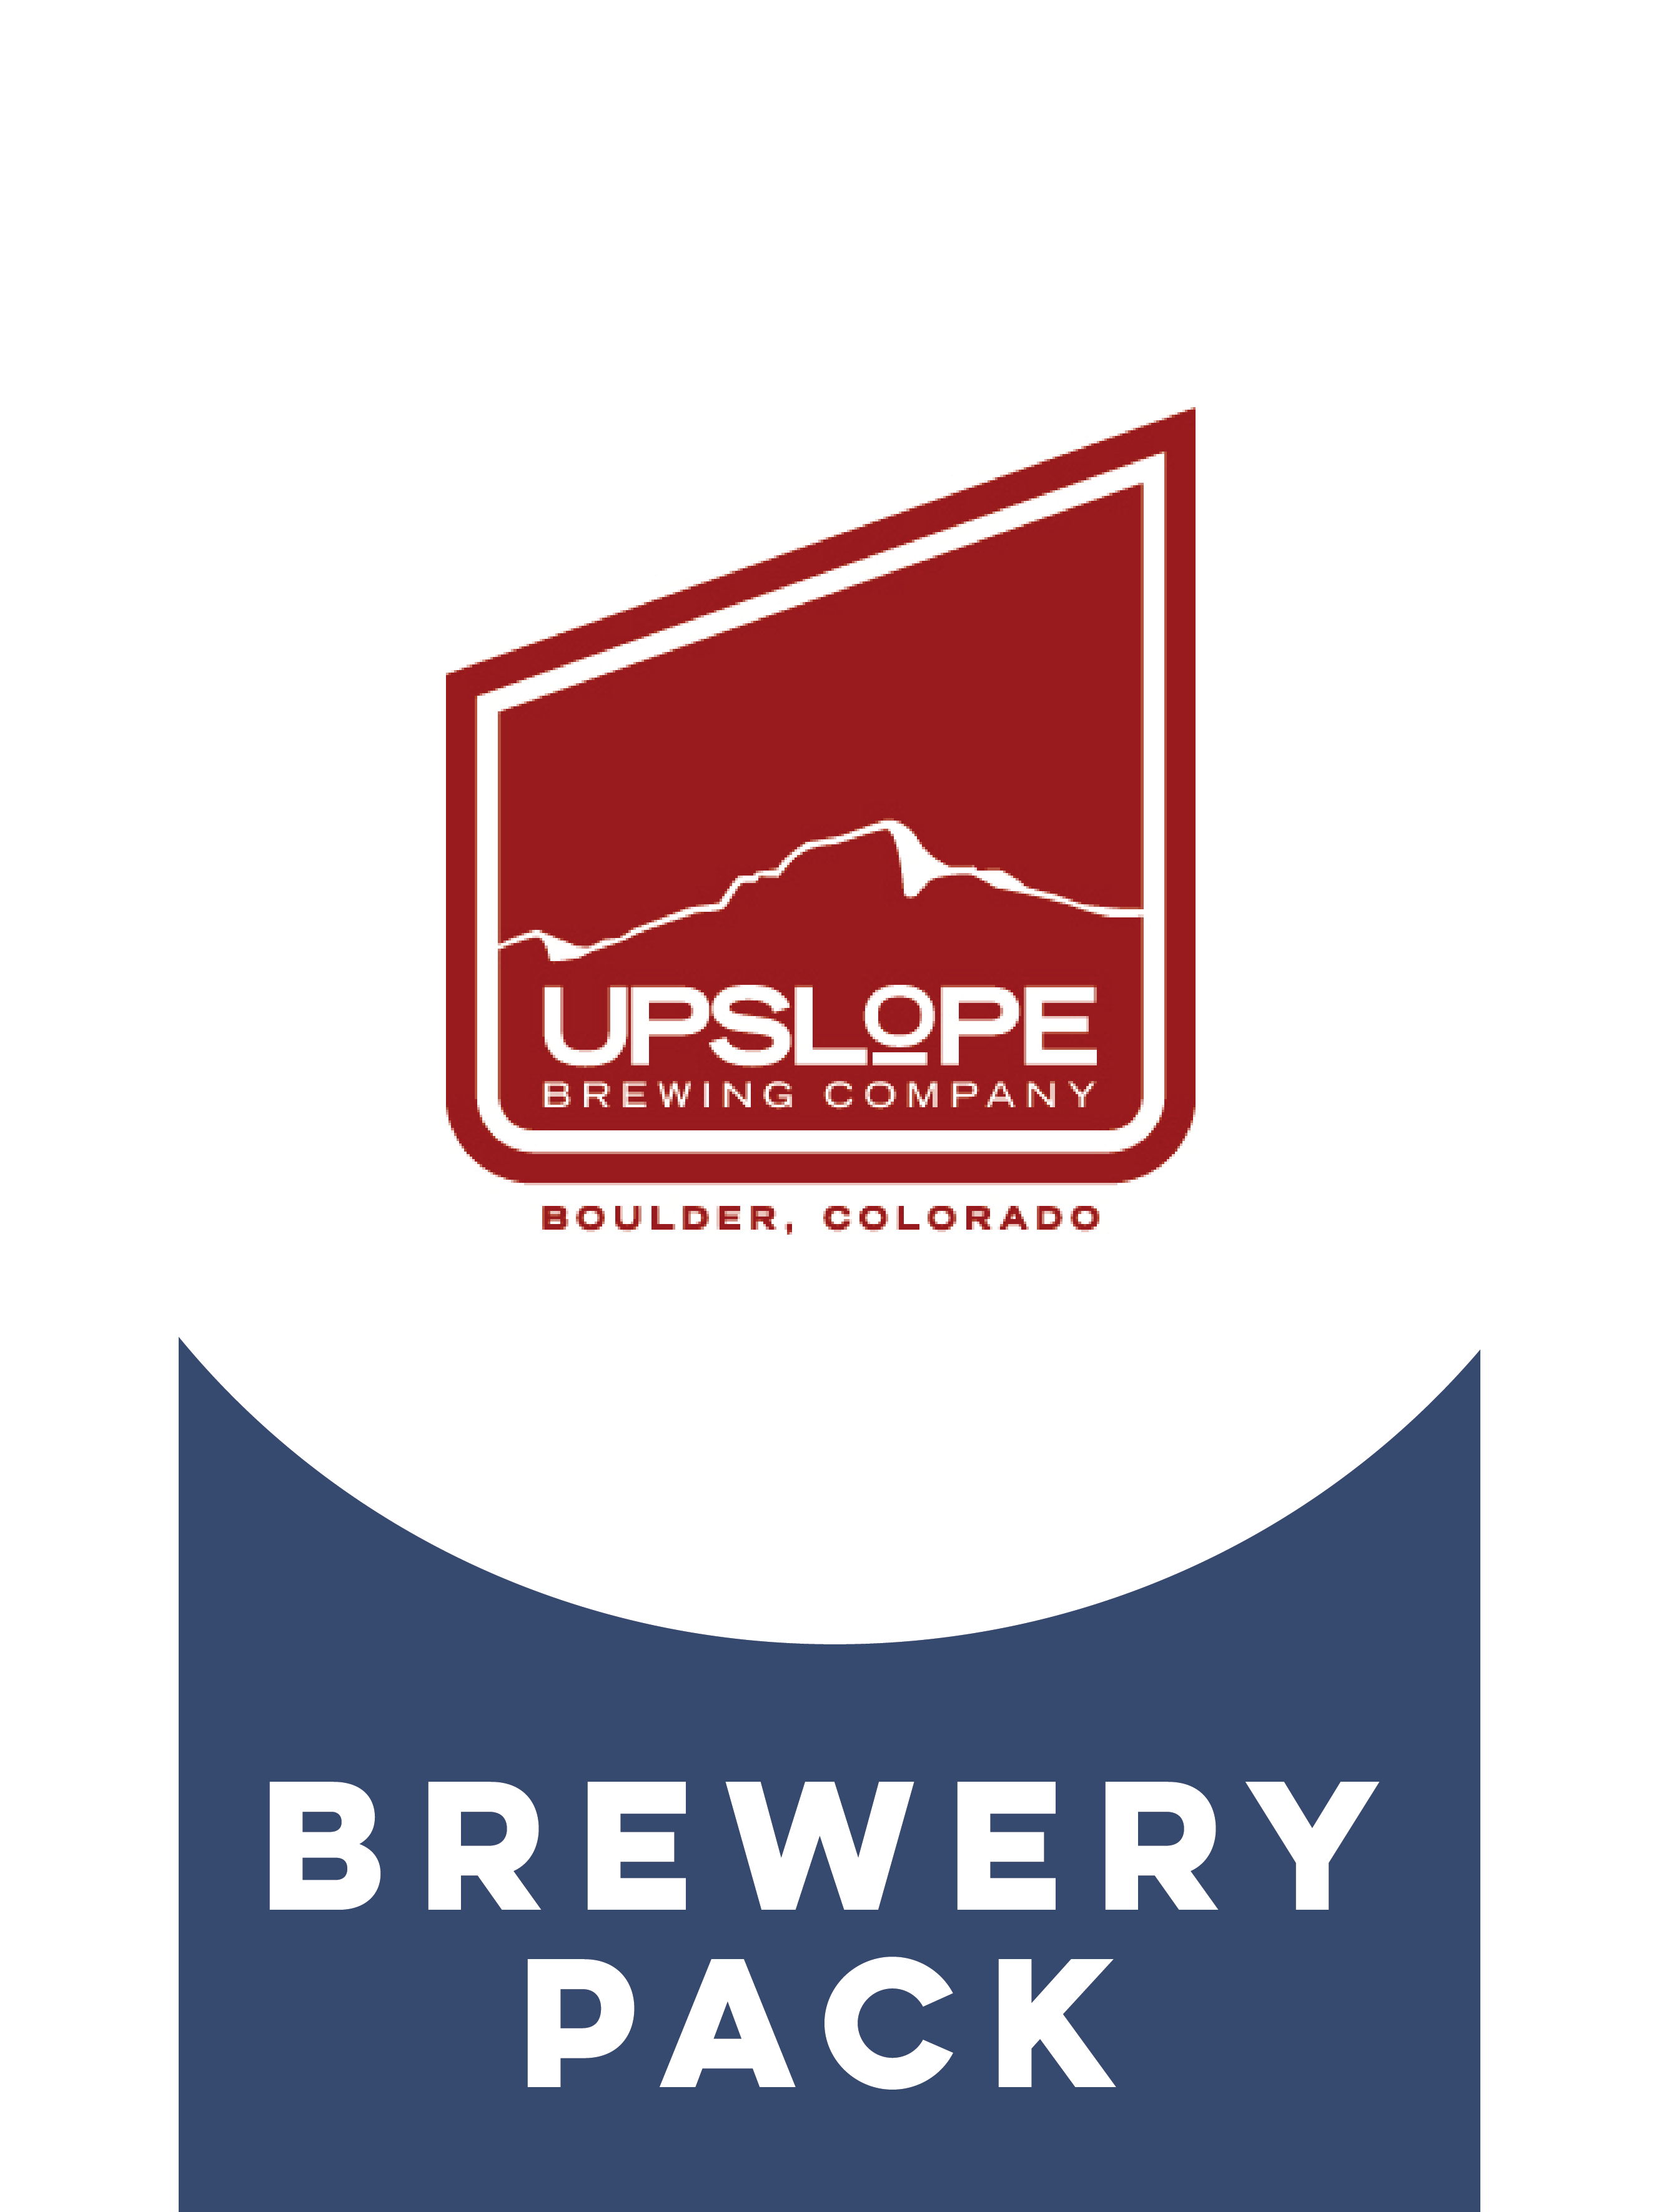 -Upslope- Upslope Brewery Pack-Packs & Cases- Only @ Beer Republic - The best online beer store for American & Canadian craft beer - Buy beer online from the USA and Canada - Bier online kopen - Amerikaans bier kopen - Craft beer store - Craft beer kopen - Amerikanisch bier kaufen - Bier online kaufen - Acheter biere online - IPA - Stout - Porter - New England IPA - Hazy IPA - Imperial Stout - Barrel Aged - Barrel Aged Imperial Stout - Brown - Dark beer - Blond - Blonde - Pilsner - Lager - Wheat - Weizen - 